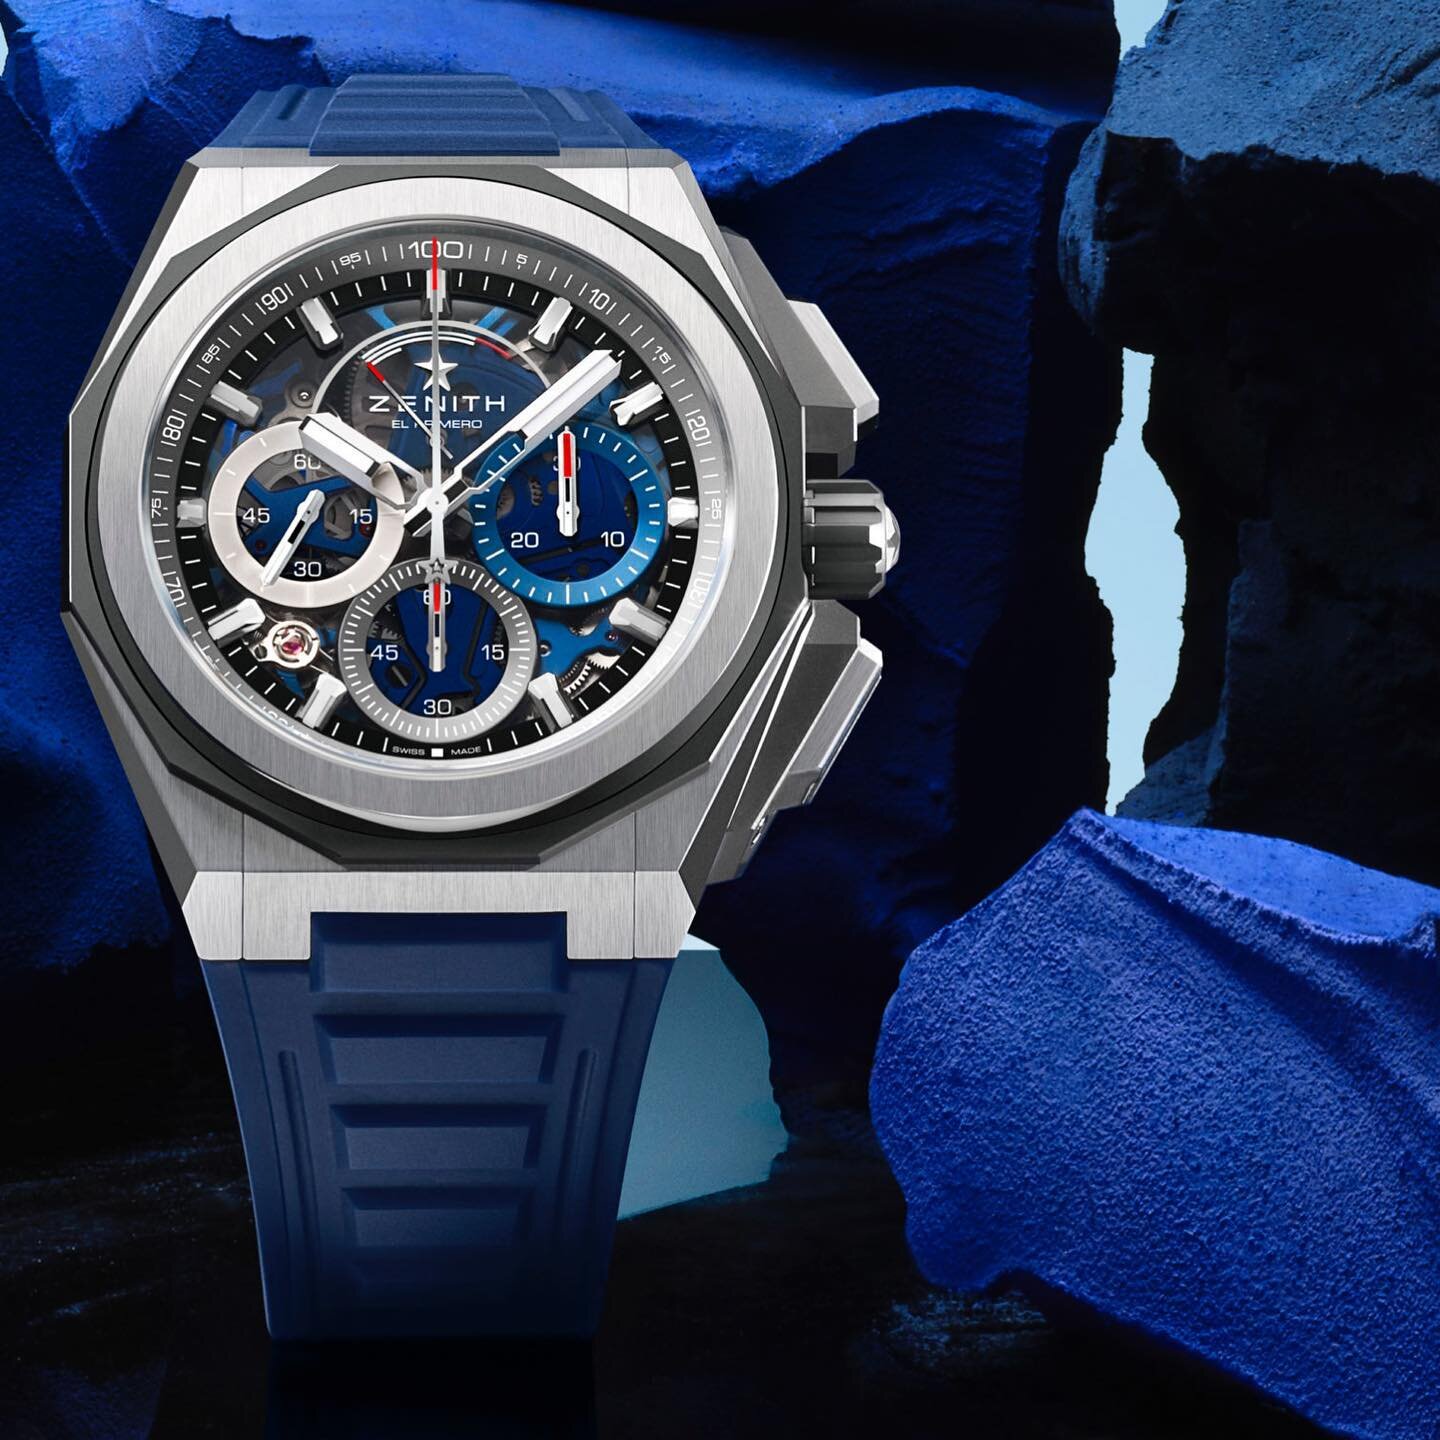 The new Zenith Defy Extreme - coming soon!